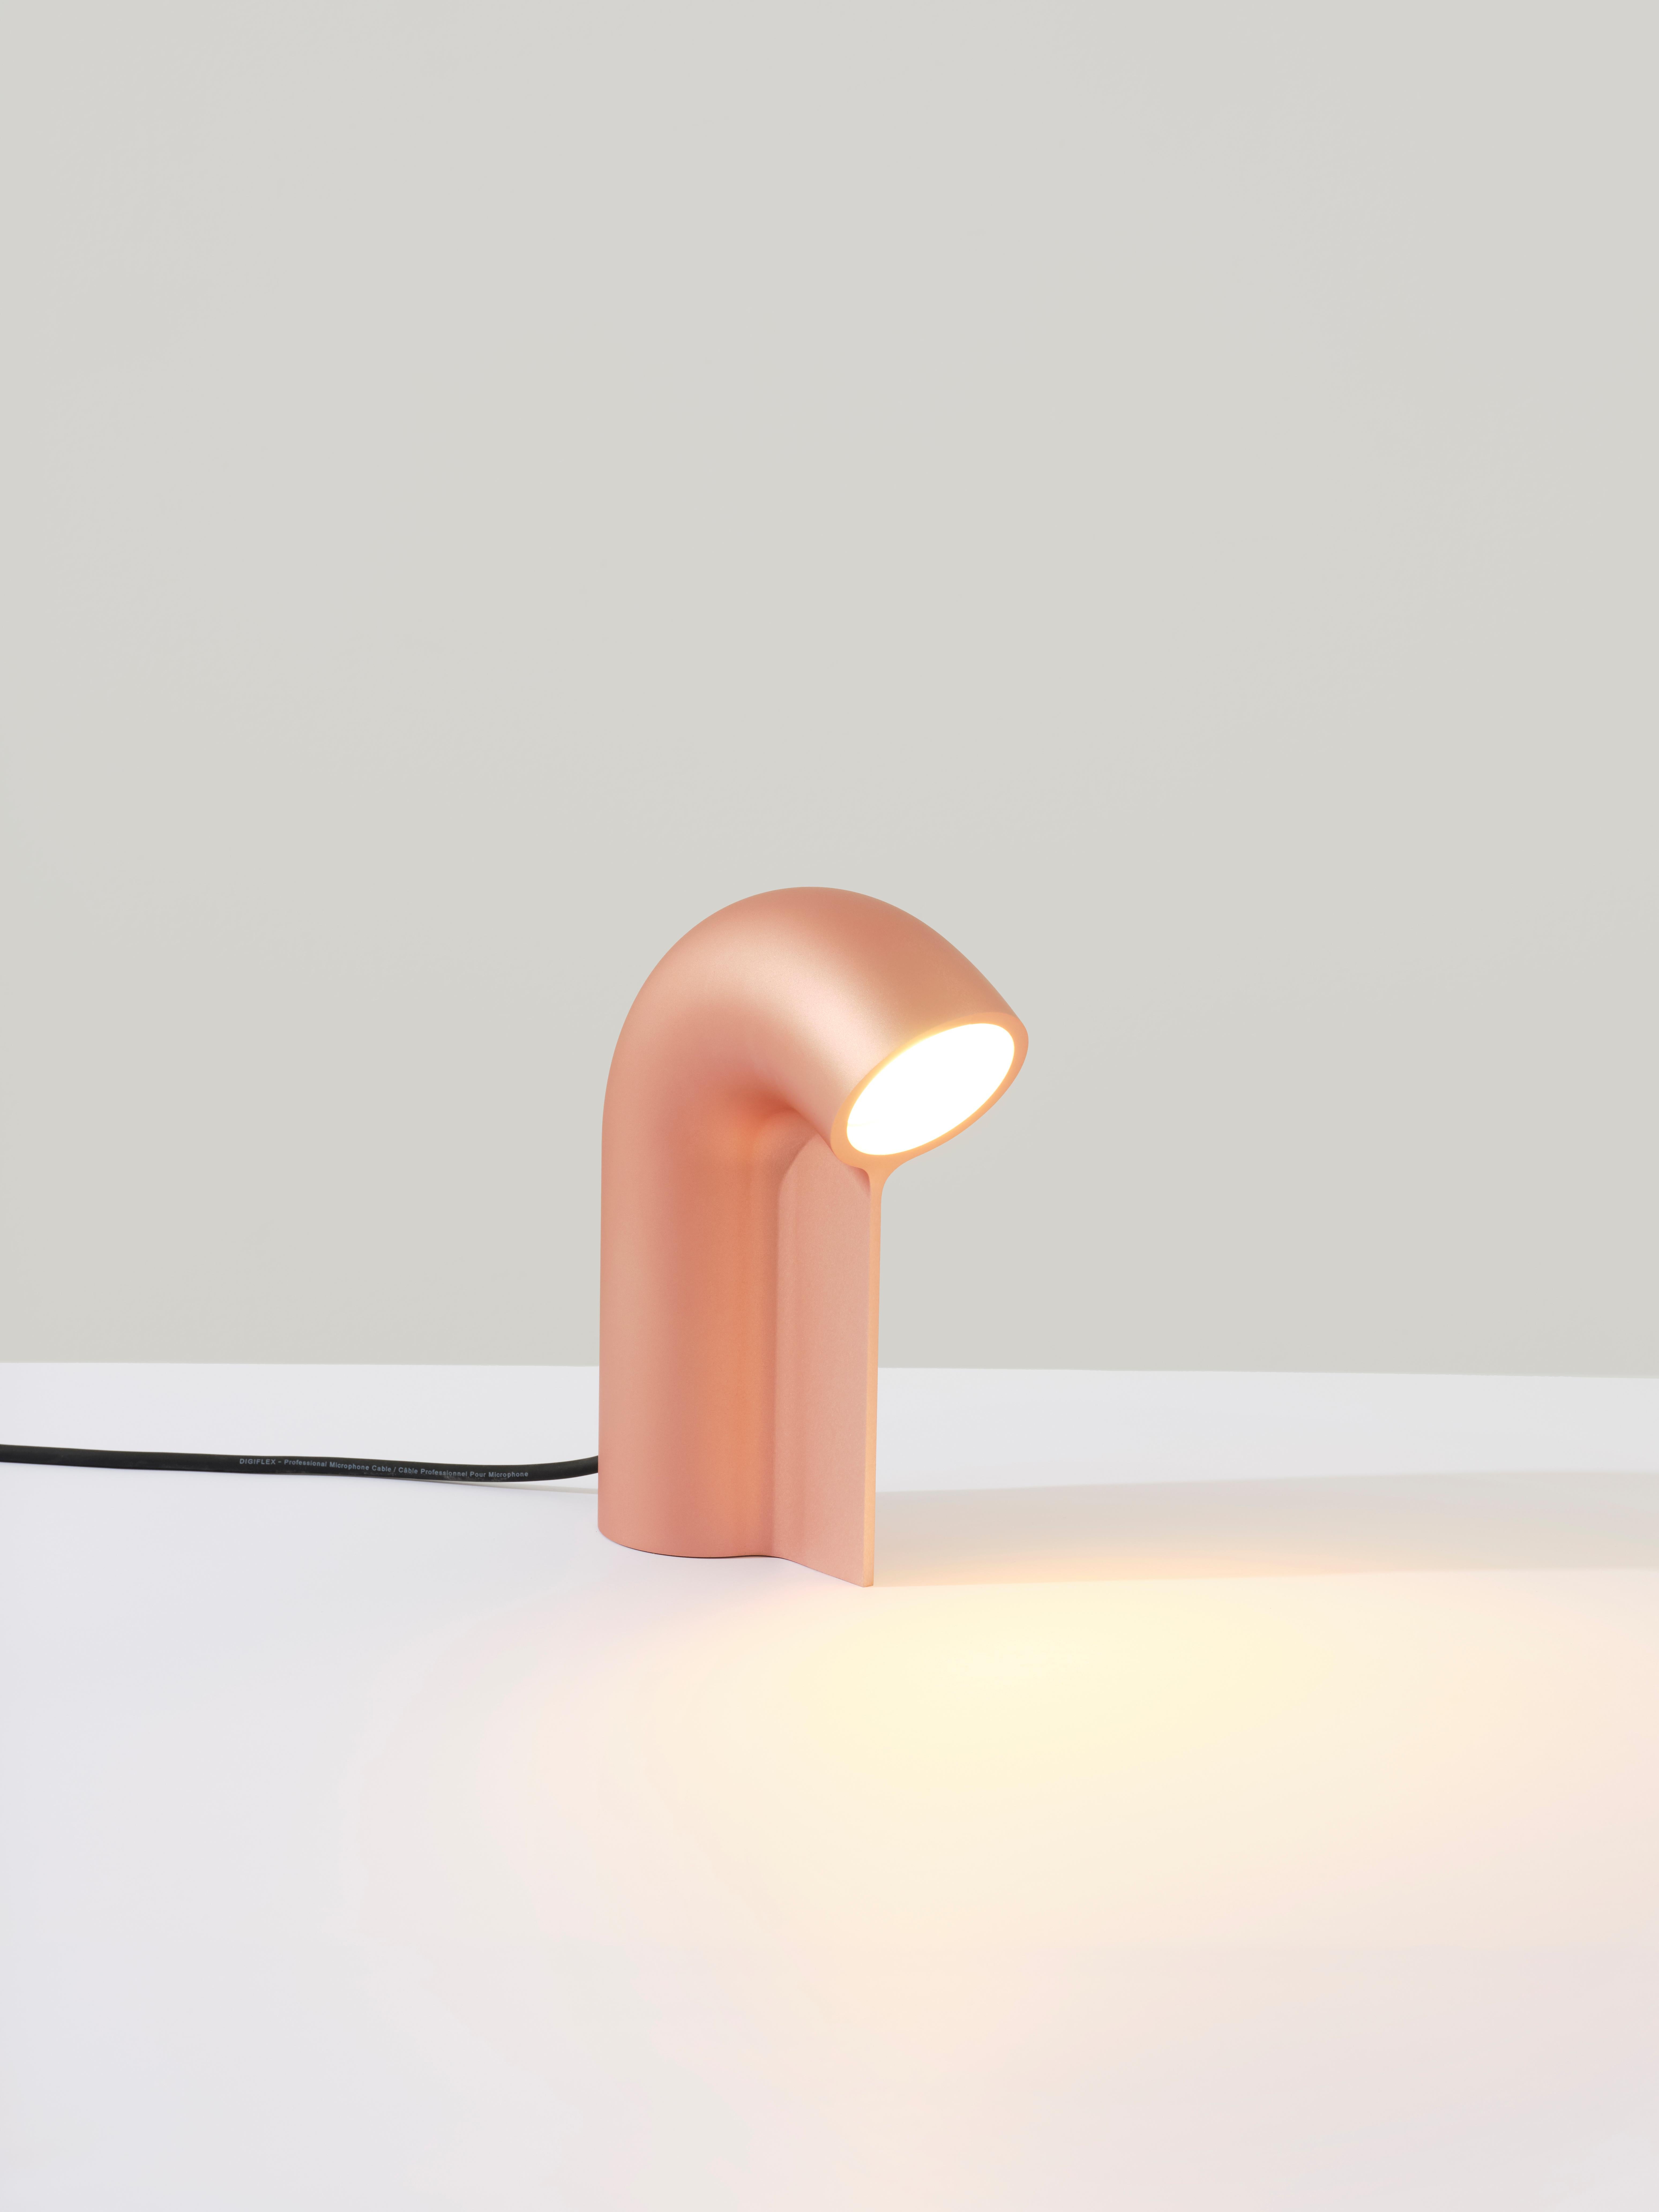 Stutter light table lamp by Calen Knauf
Dimensions: D 7.5 x W 17 x H 23.5 cm
Materials: solid anodized aluminum

The Stutter Lamp is milled from a solid block of aluminum using a 5-axis milling machine. Its shape mimics having been cut from a